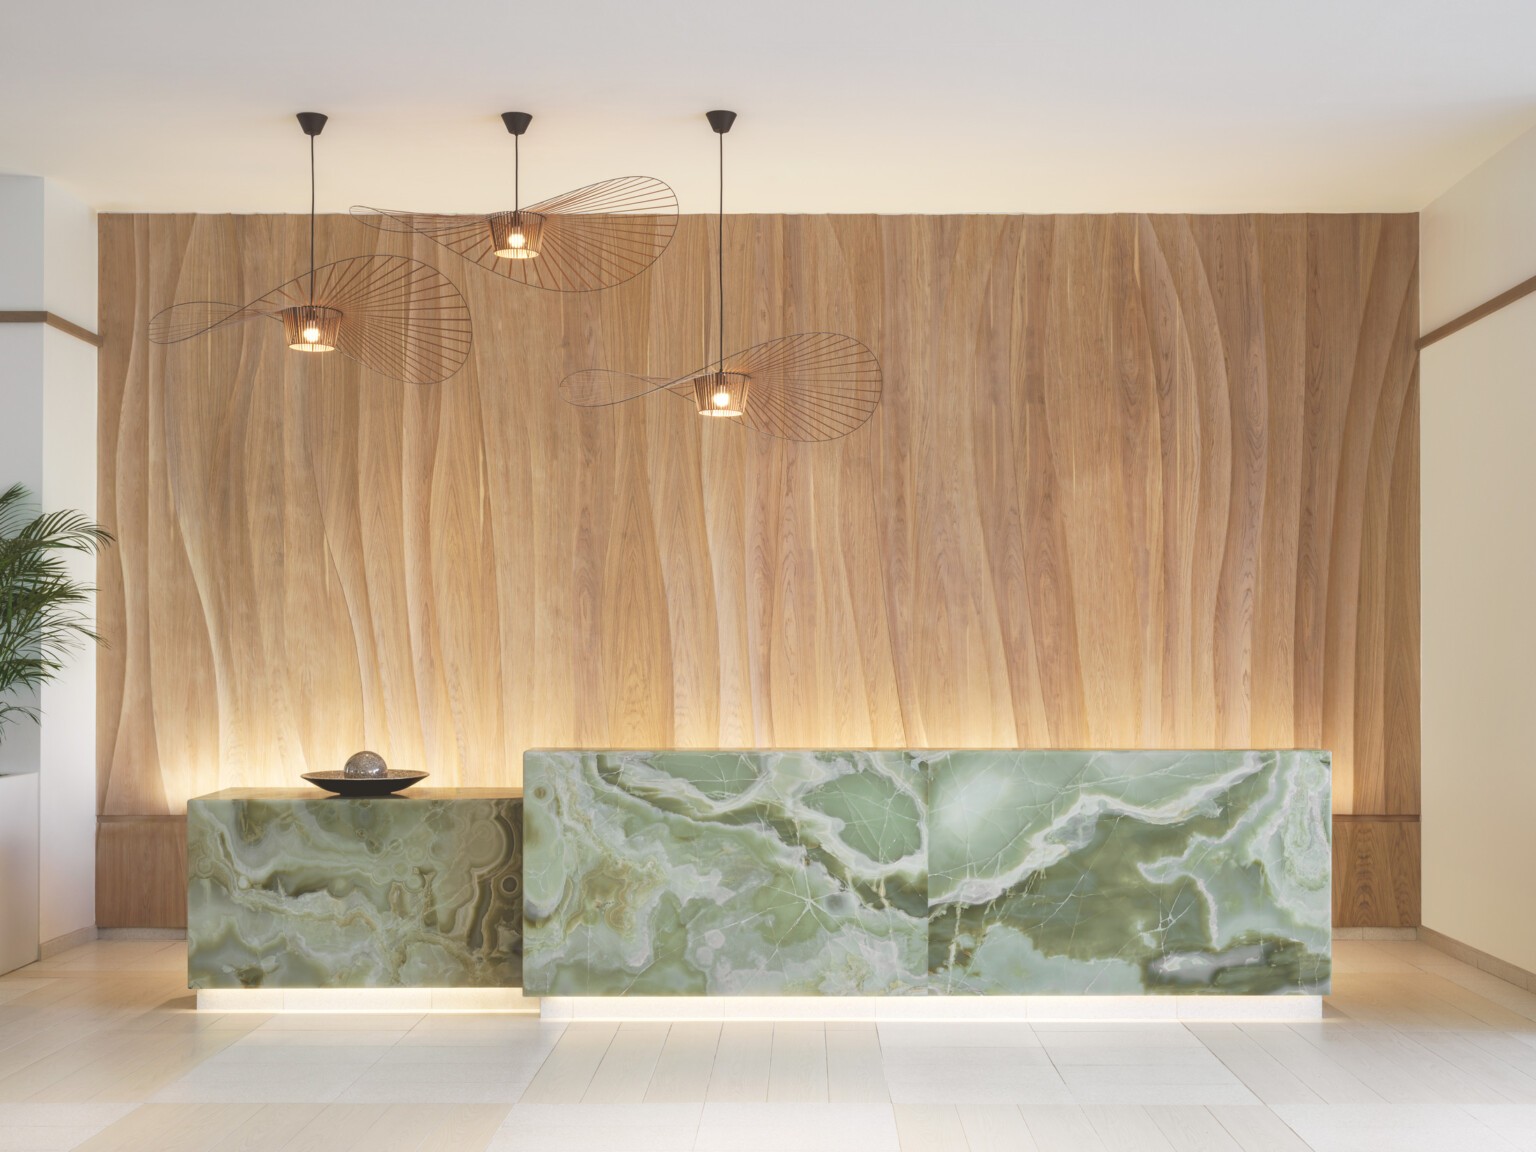 AC Hotel Naples 5th Avenue lobby showcasing a green jade desk in front of a natural wood wall with modern light fixtures suspended from the c